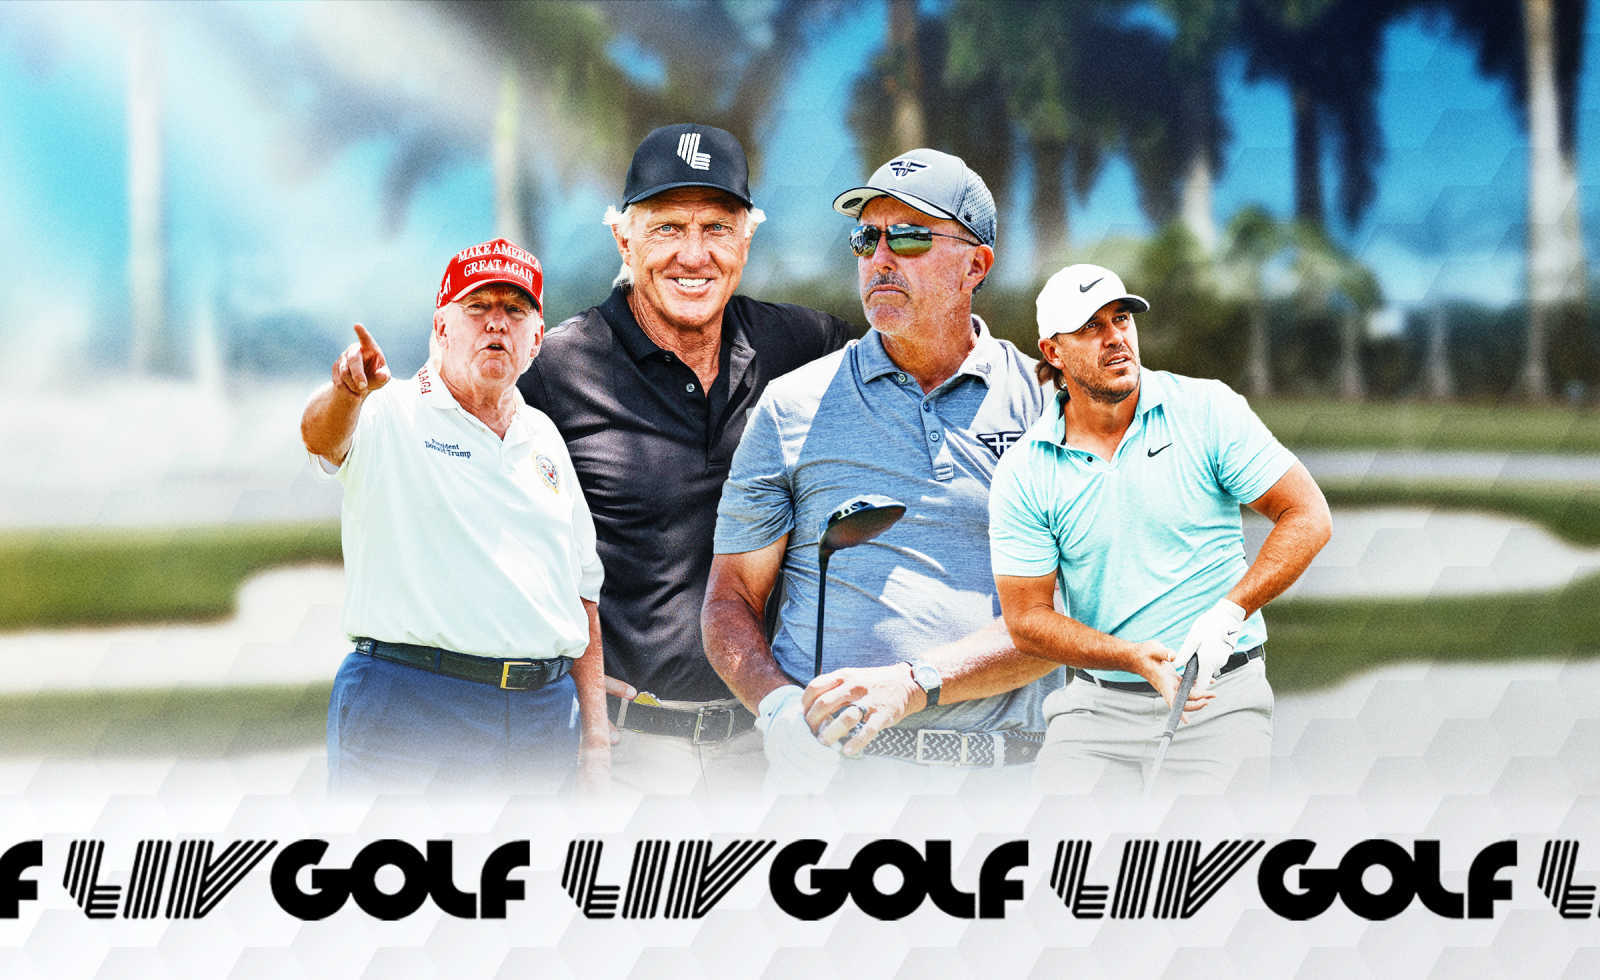 Whats next for LIV Golf after two seasons?